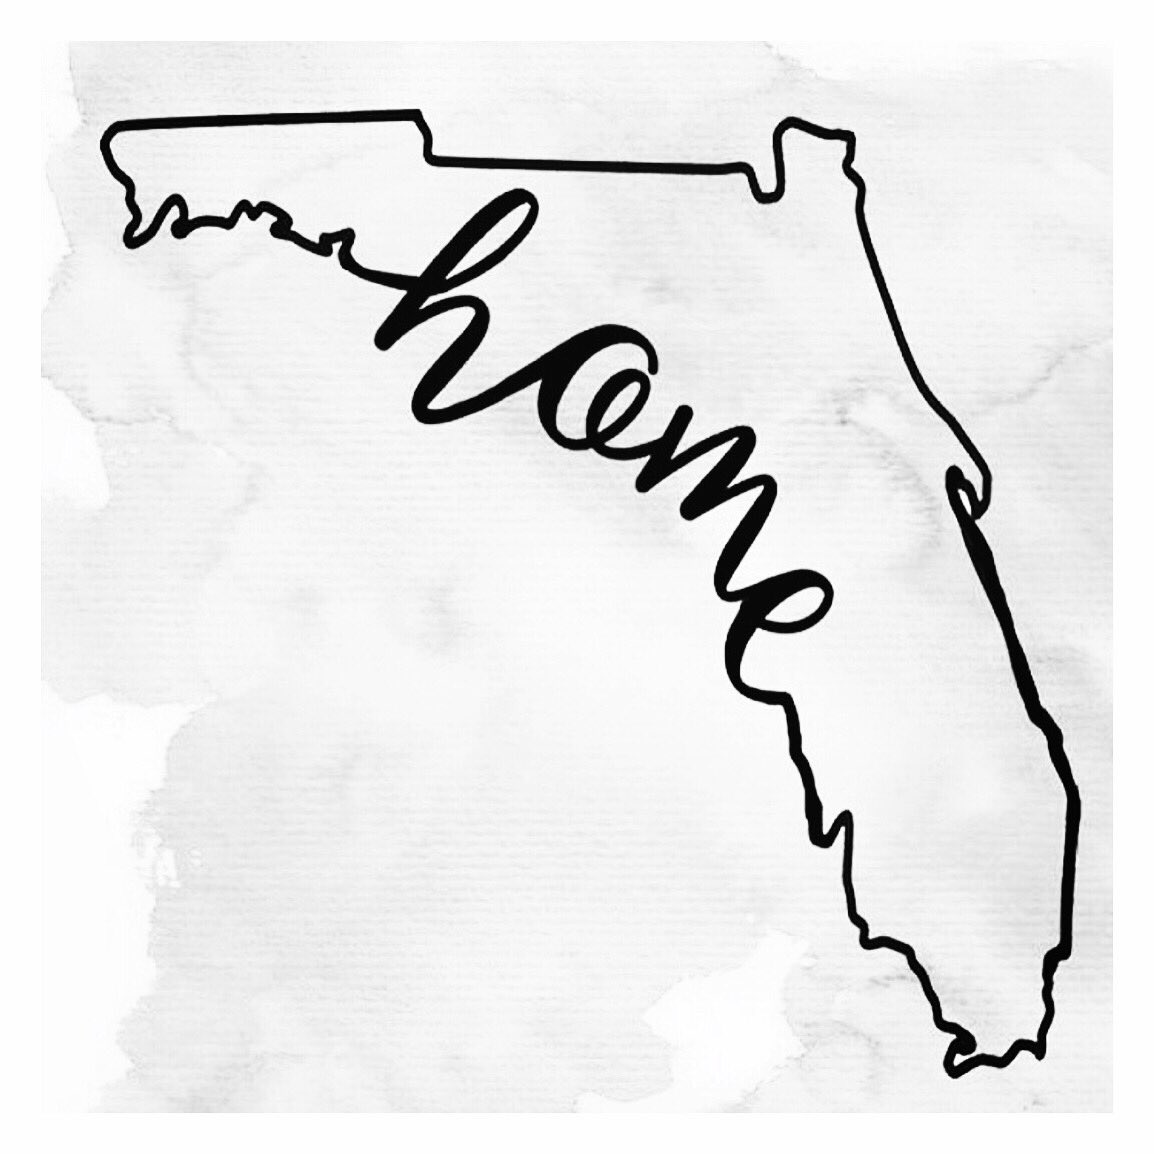 praying for my people. sending love and hoping that all are safe. #homestate #florida #irma https://t.co/9gs3hp3TPh